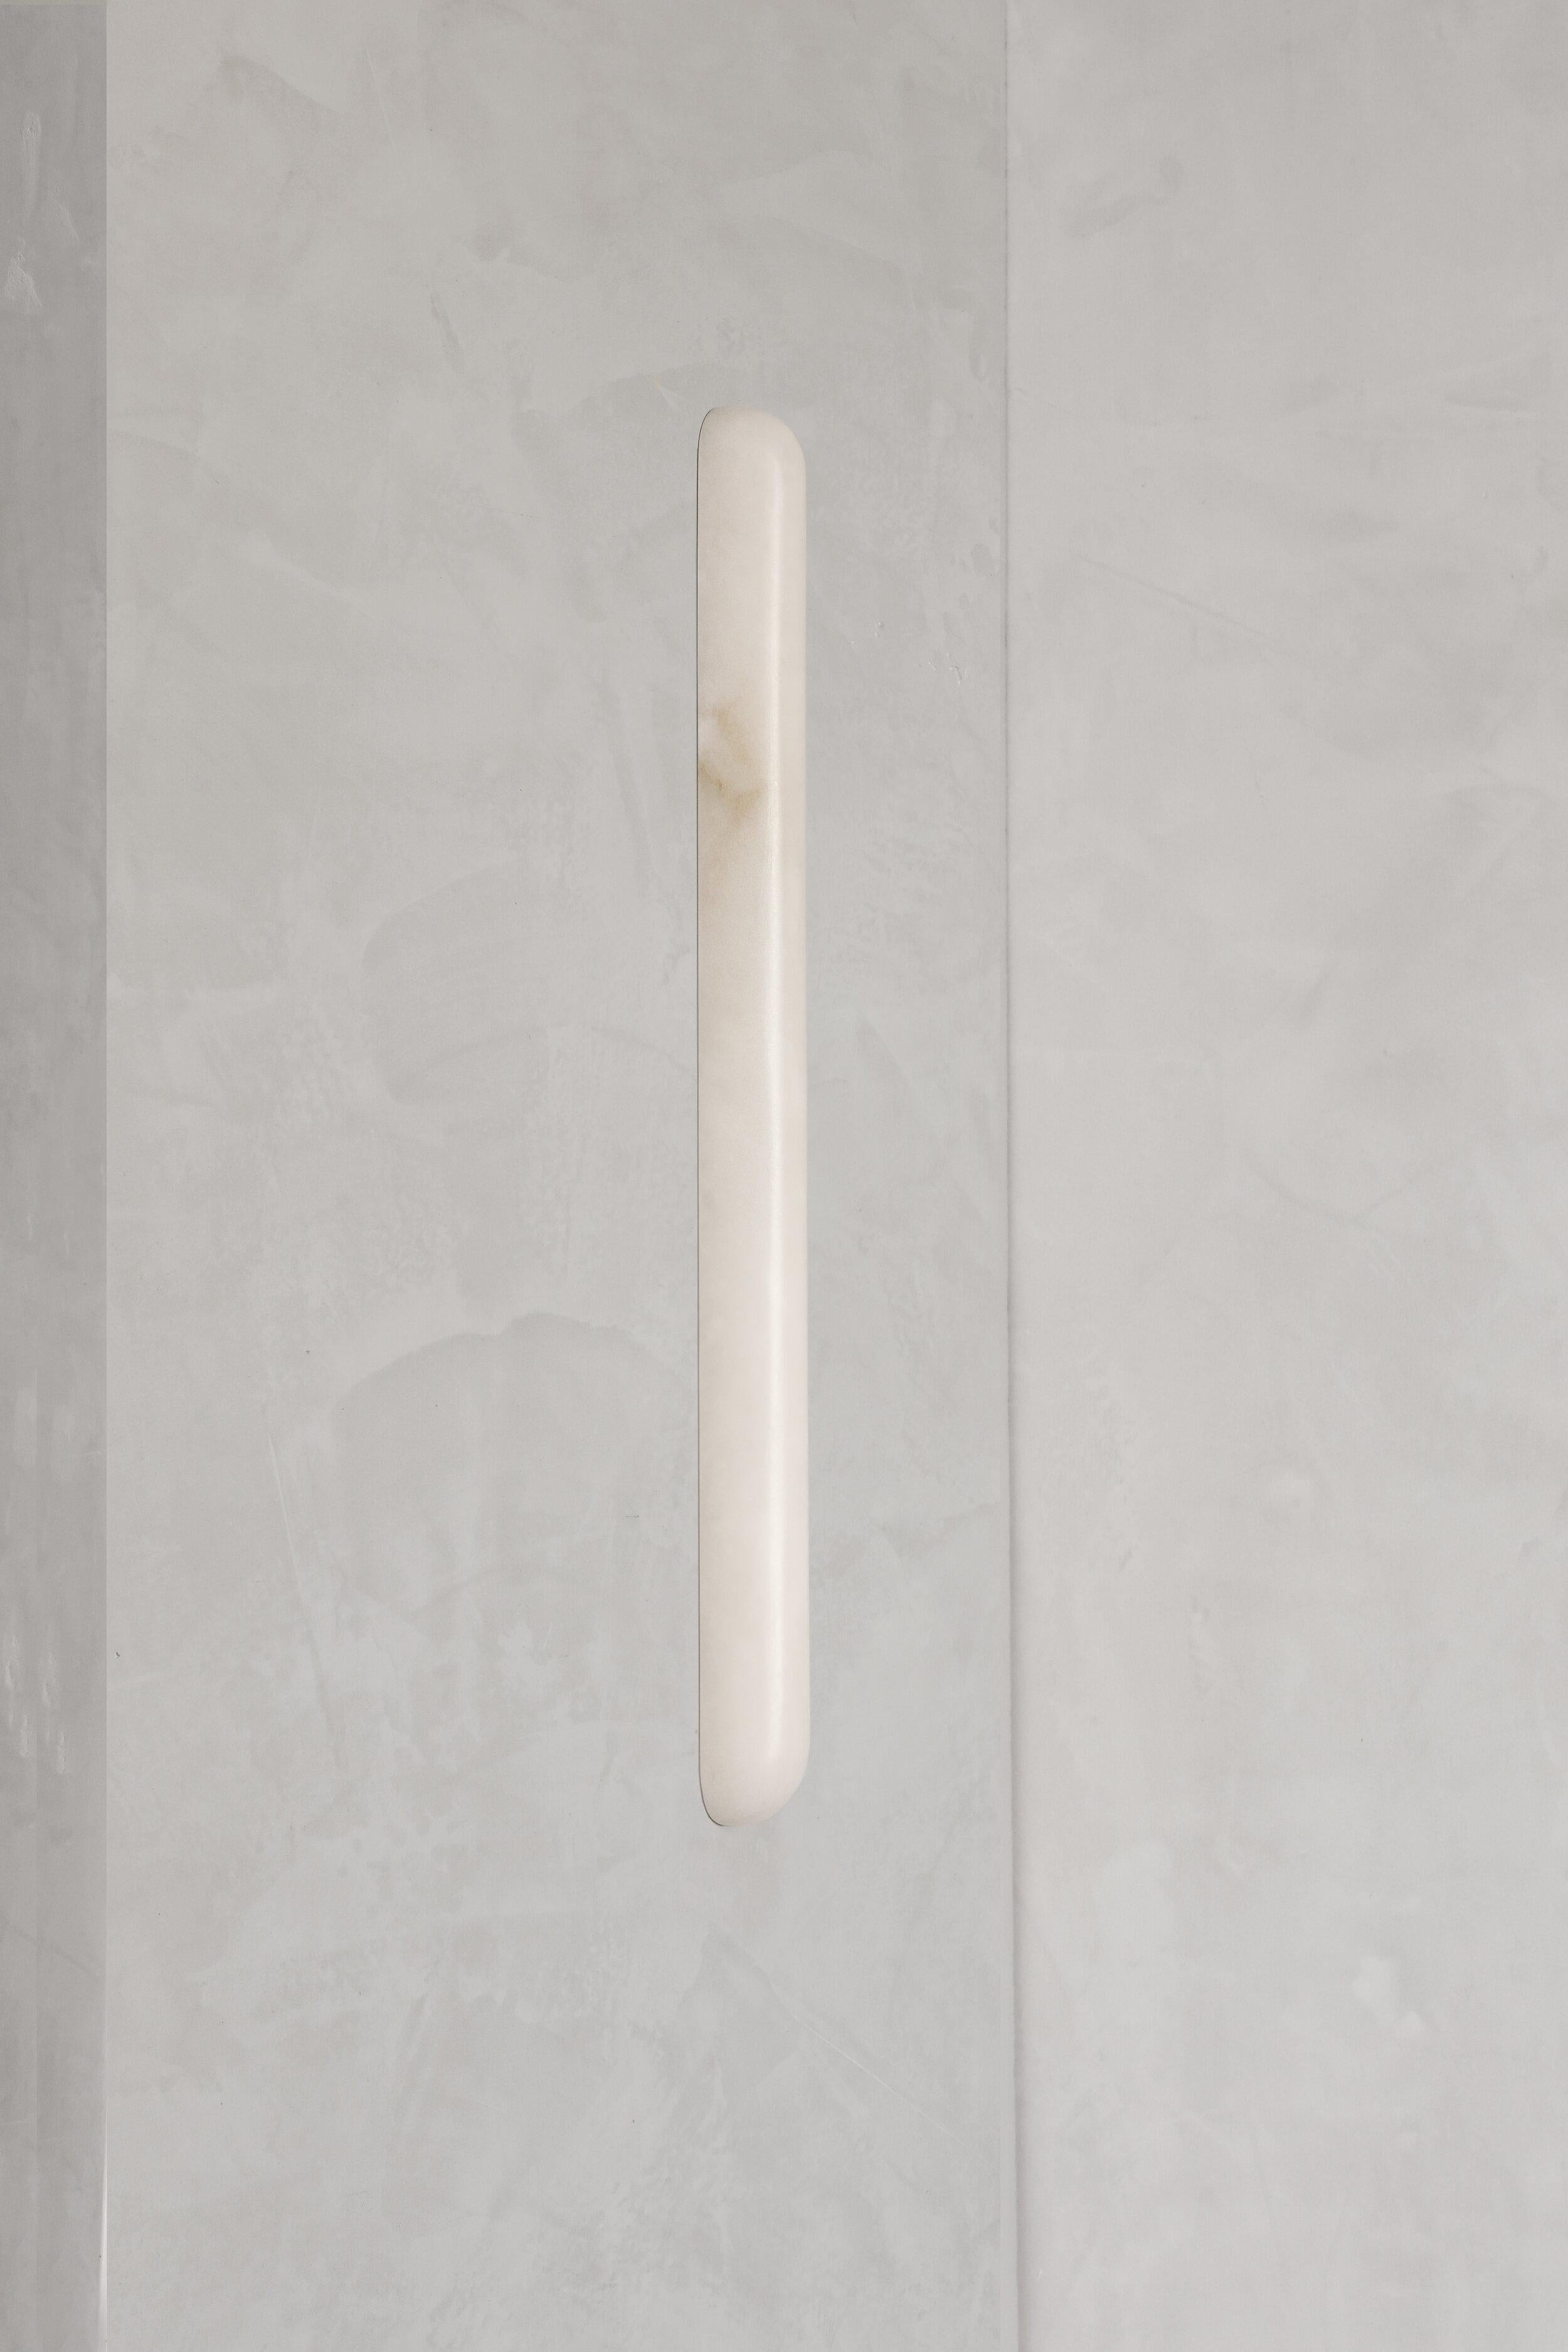 Tub 65 Alabaster wall light by Contain.
Dimensions: D 4 x W 4 x H 65 cm
Materials: Alabaster
Also available in different dimensions.

All our lamps can be wired according to each country. If sold to the USA it will be wired for the USA for